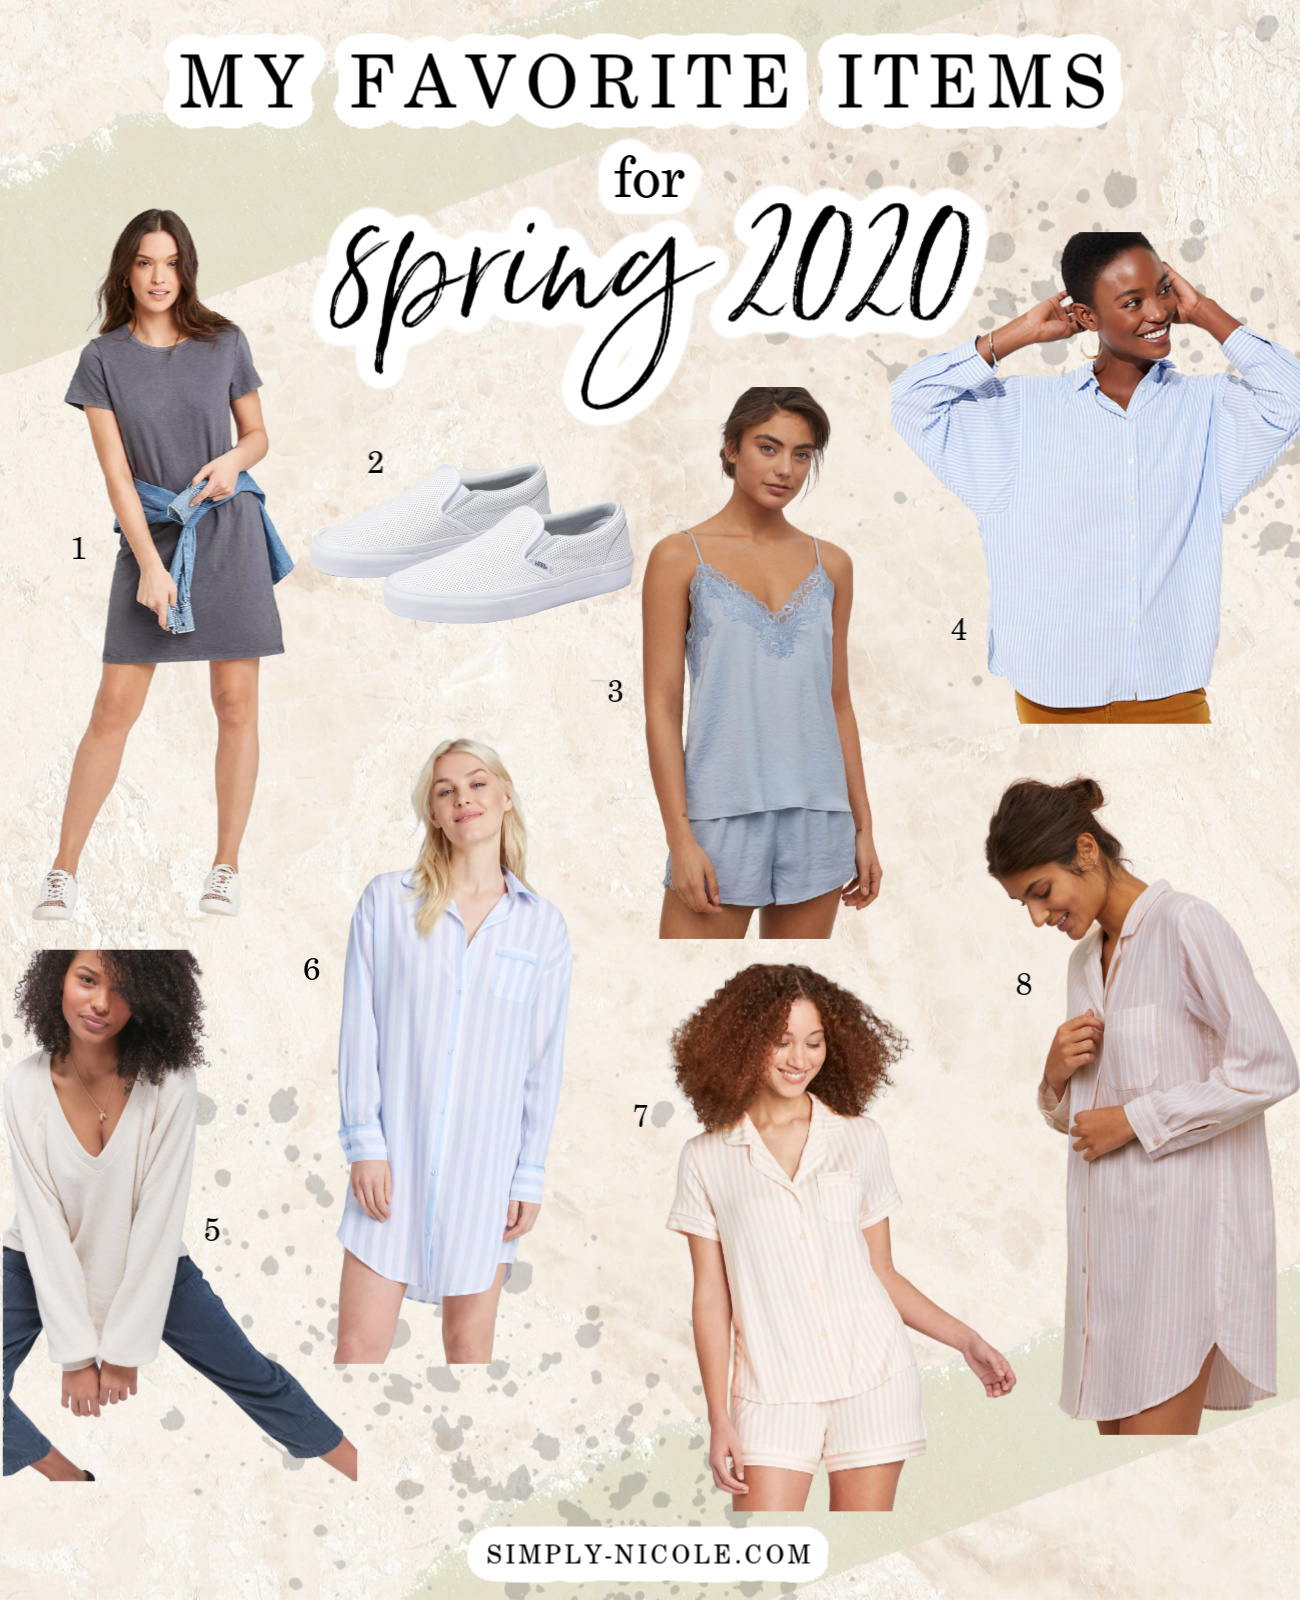 Favorite clothes for spring 2020